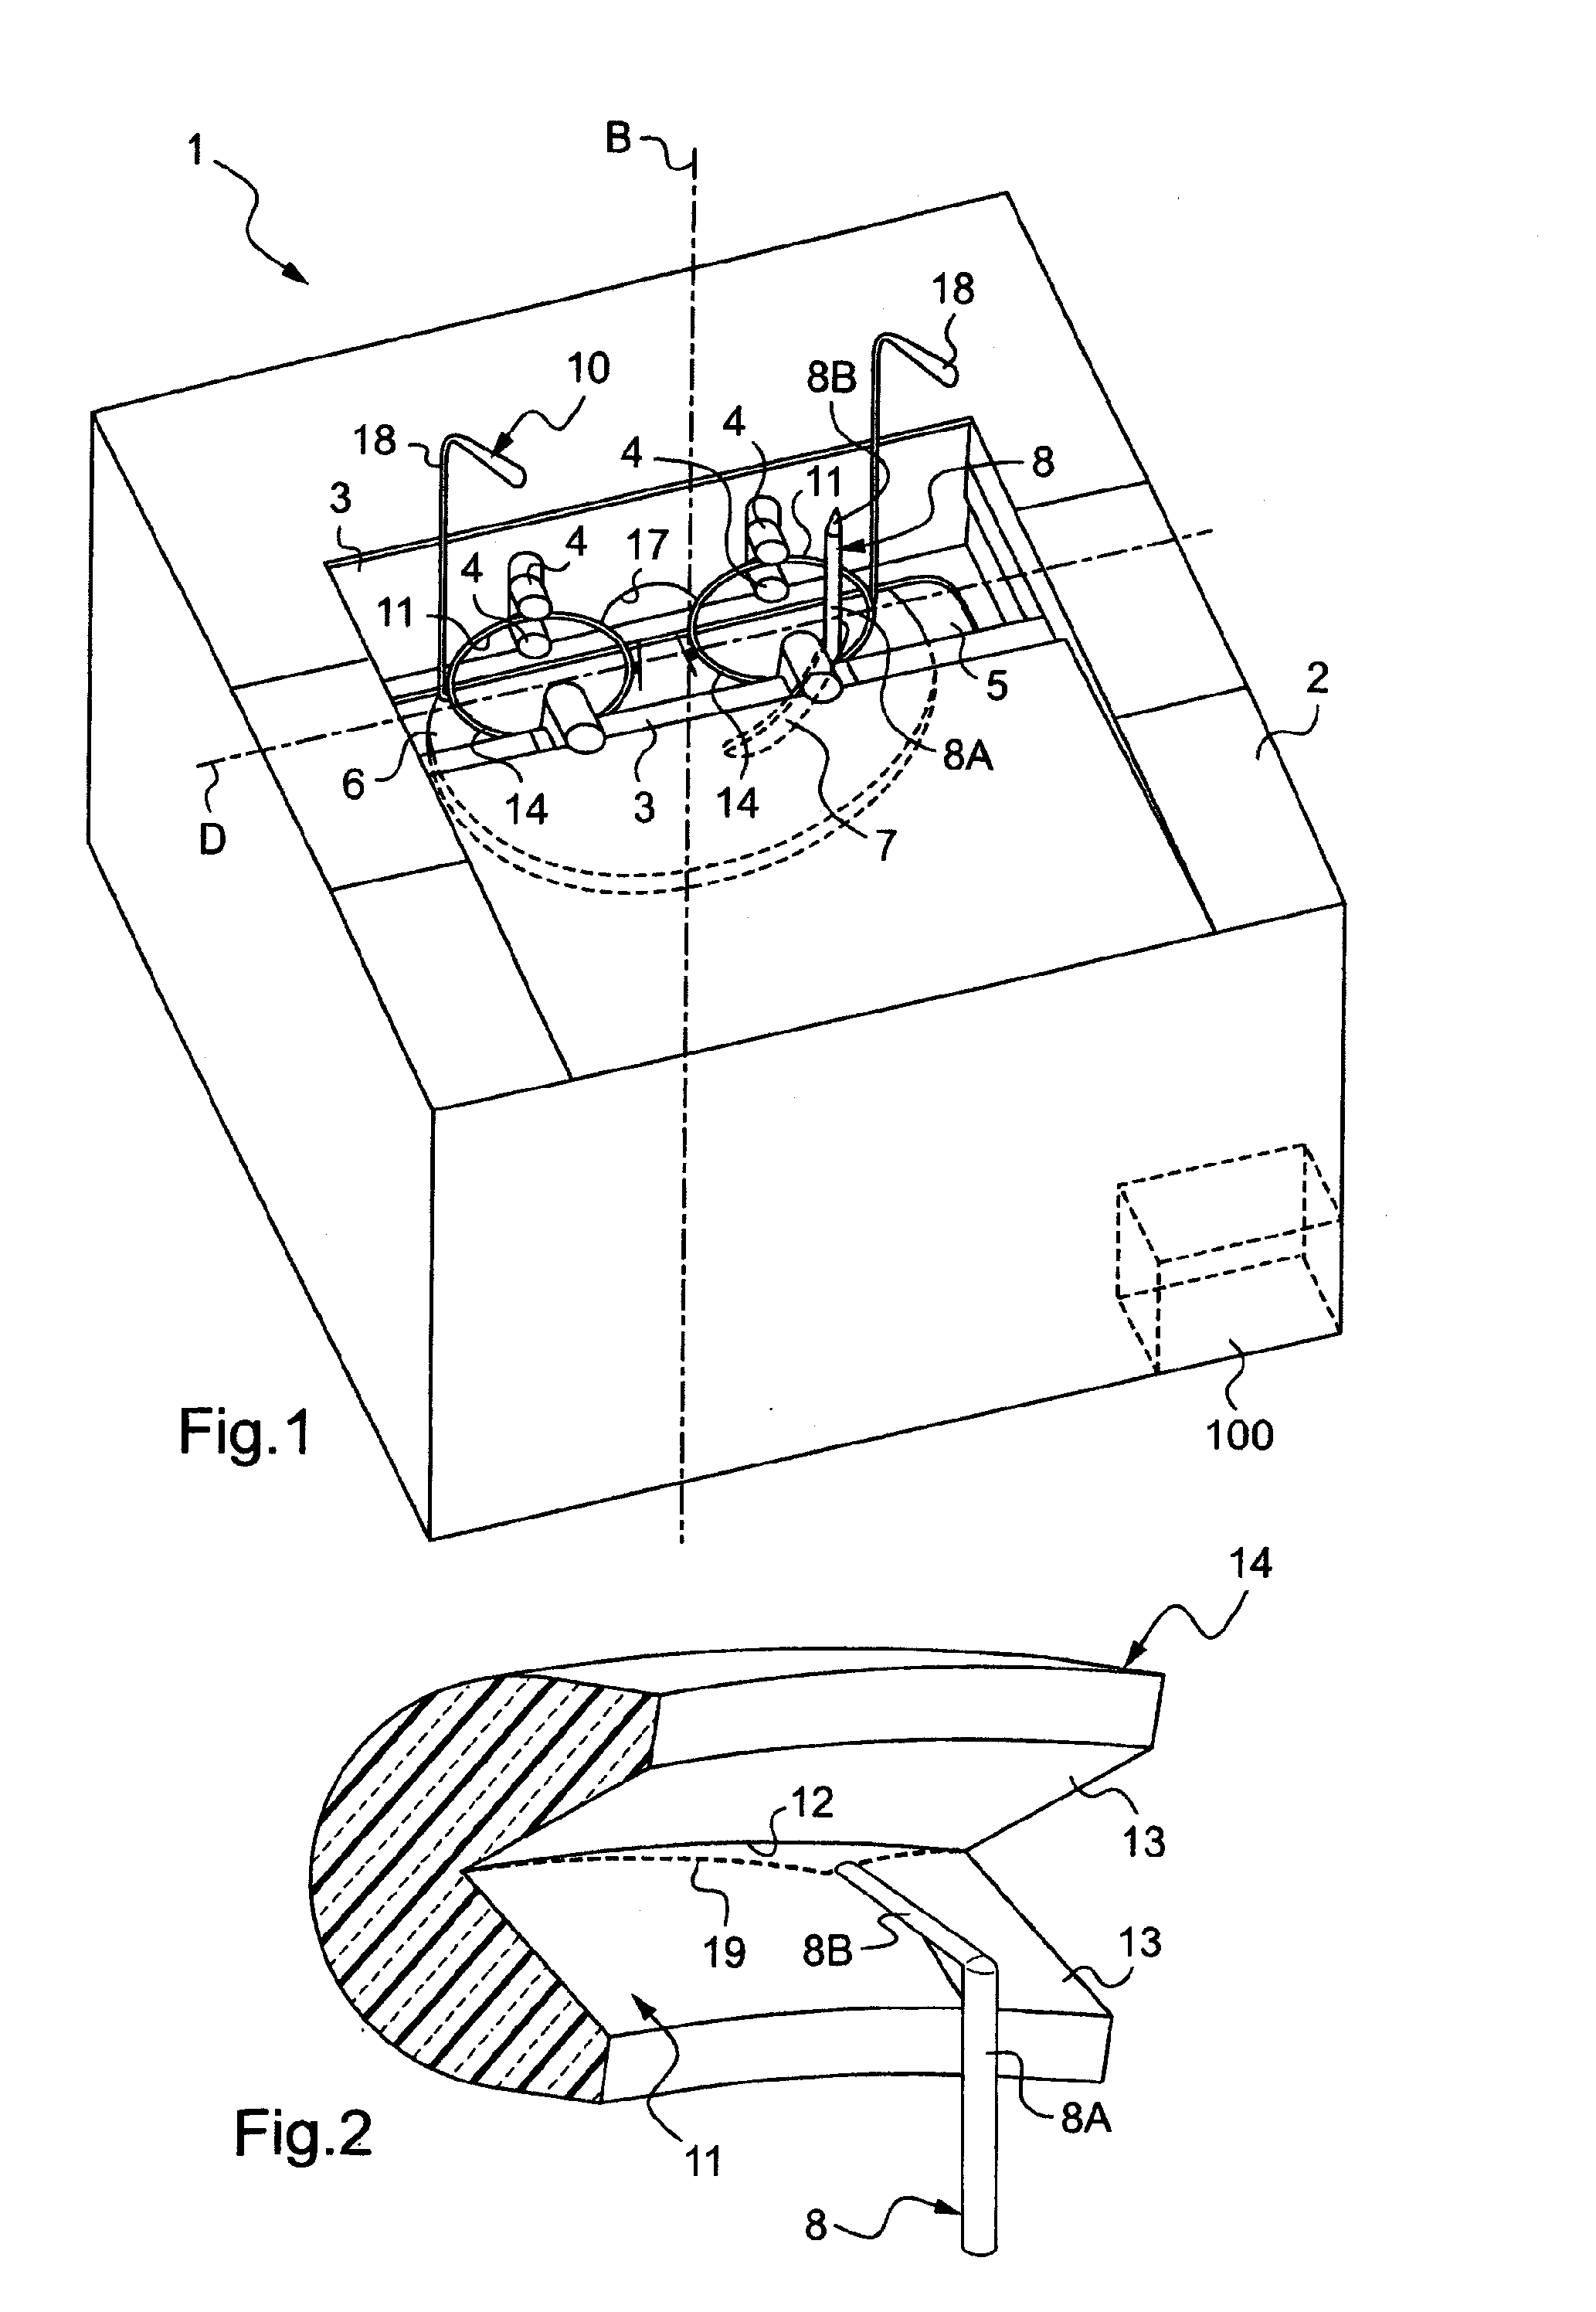 Method of correcting the shape of a sensed curve approximating a longitudinal trace of a bezel of an eyeglass frame, and a method of acquiring the shape of an outline of such a bezel